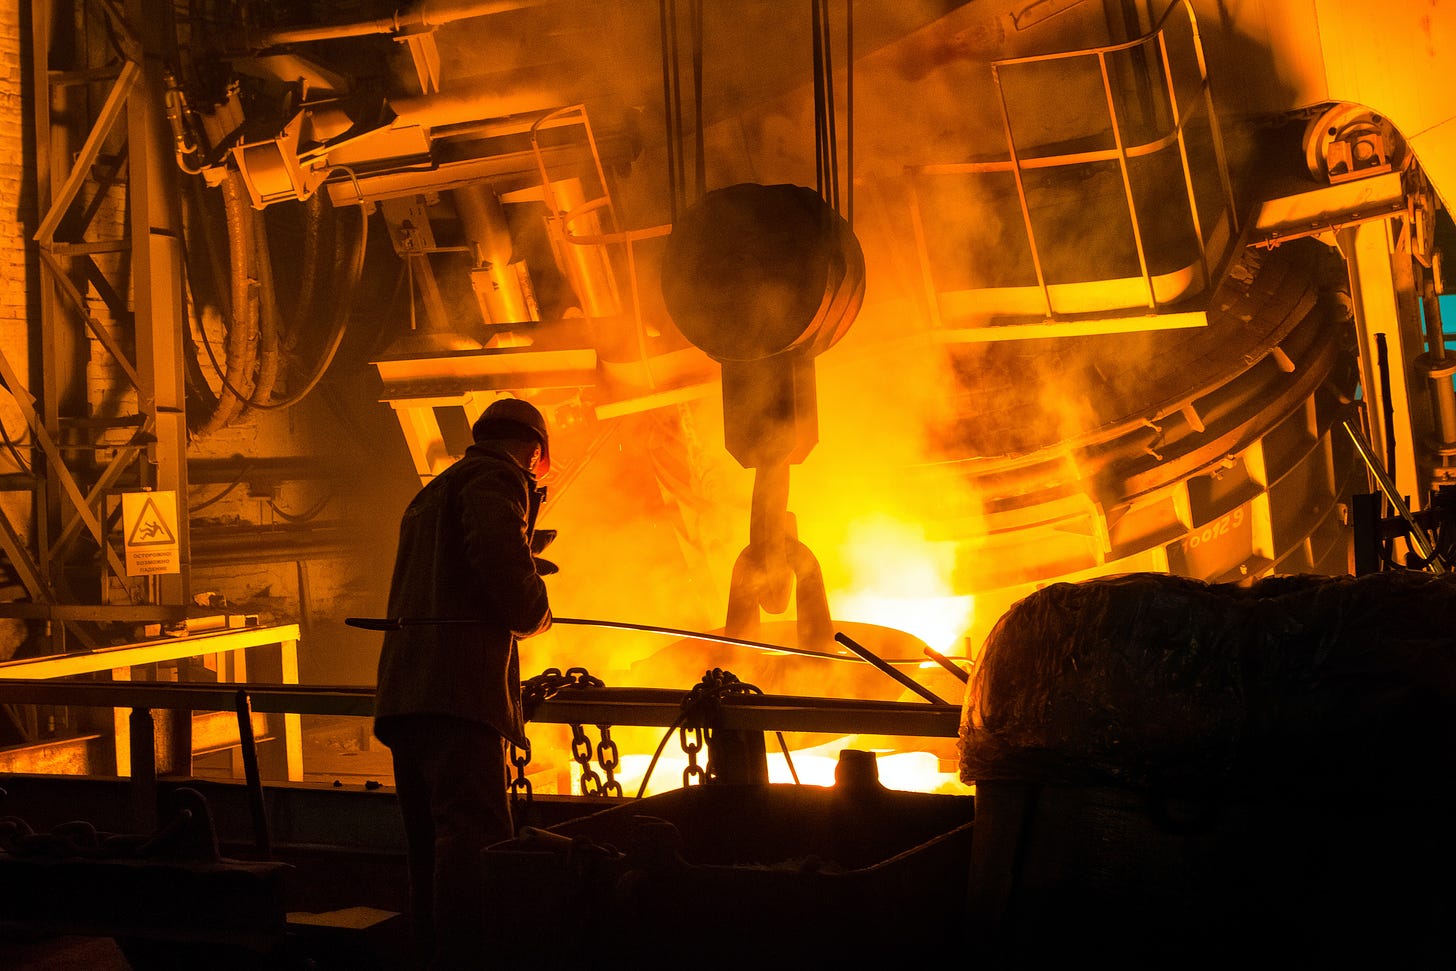 A man operates an industrial forge.